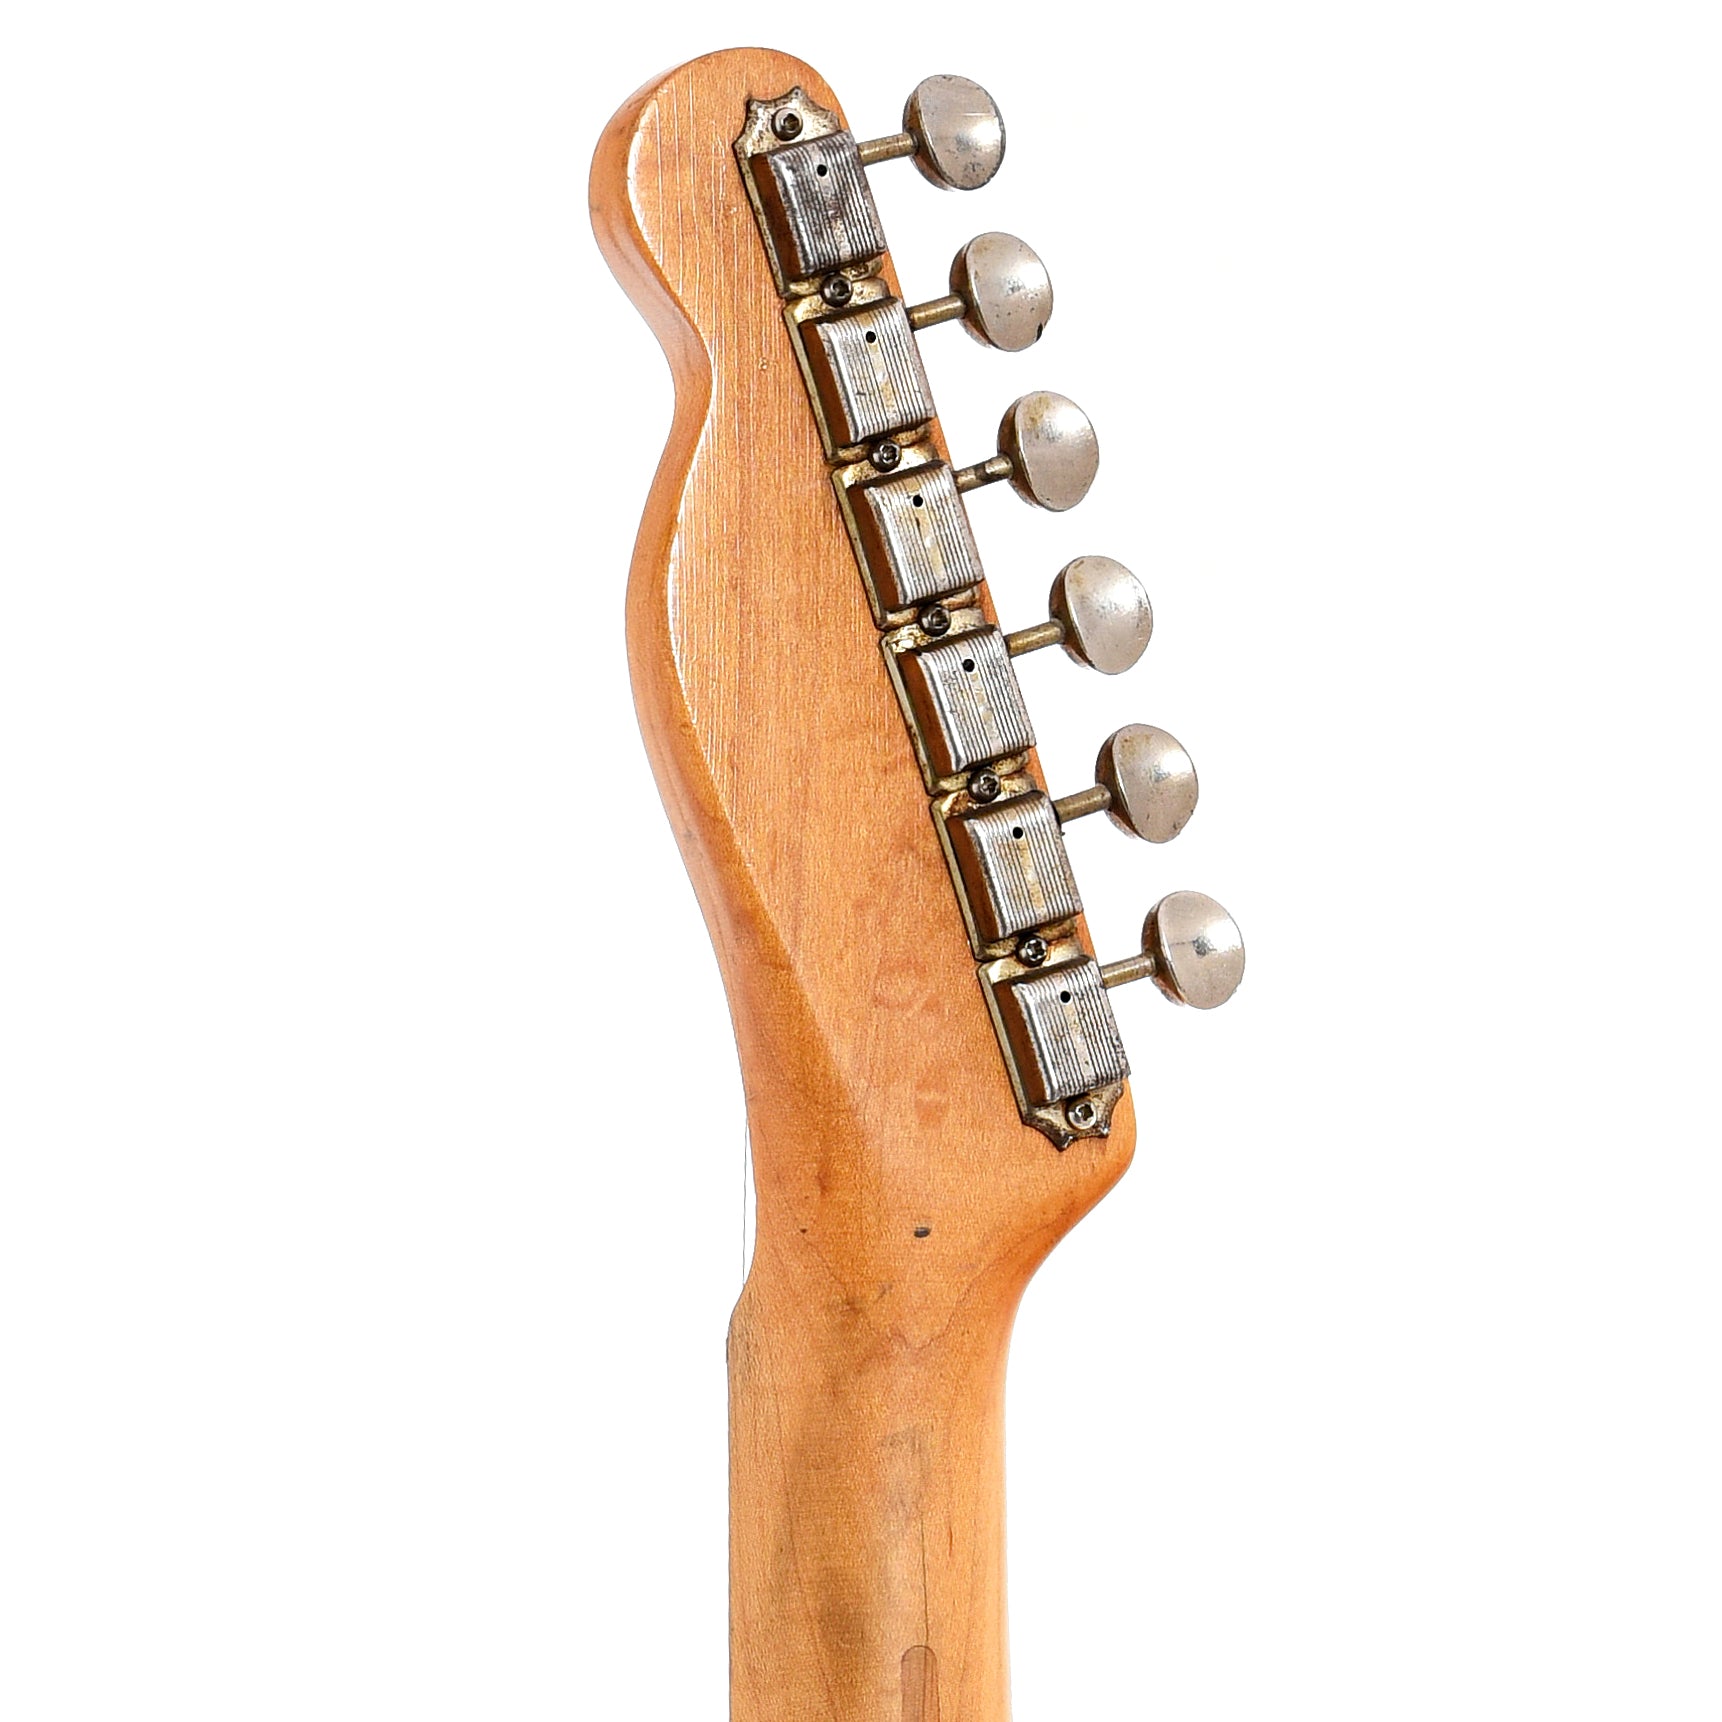 Back headstock of Fender Esquire Electric Guitar (1954)